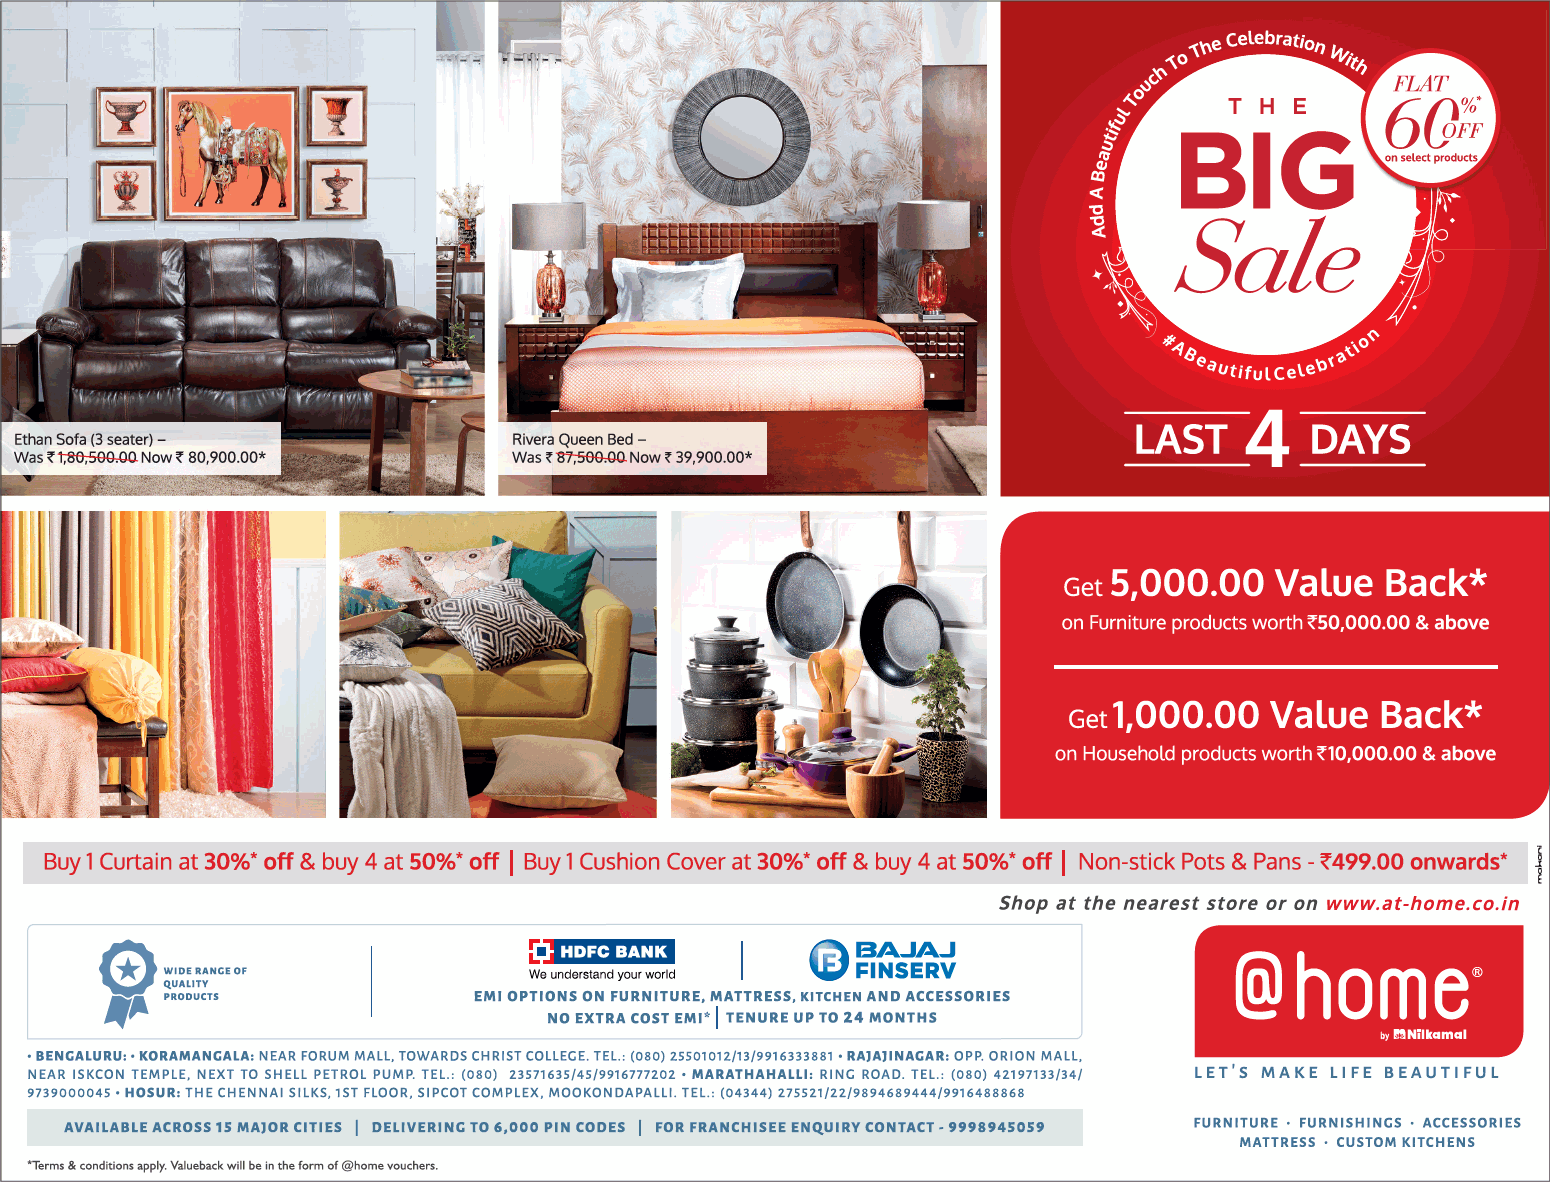 at-home-furniture-the-big-sale-flat-60%-off-ad-times-of-india-bangalore-22-02-2019.png